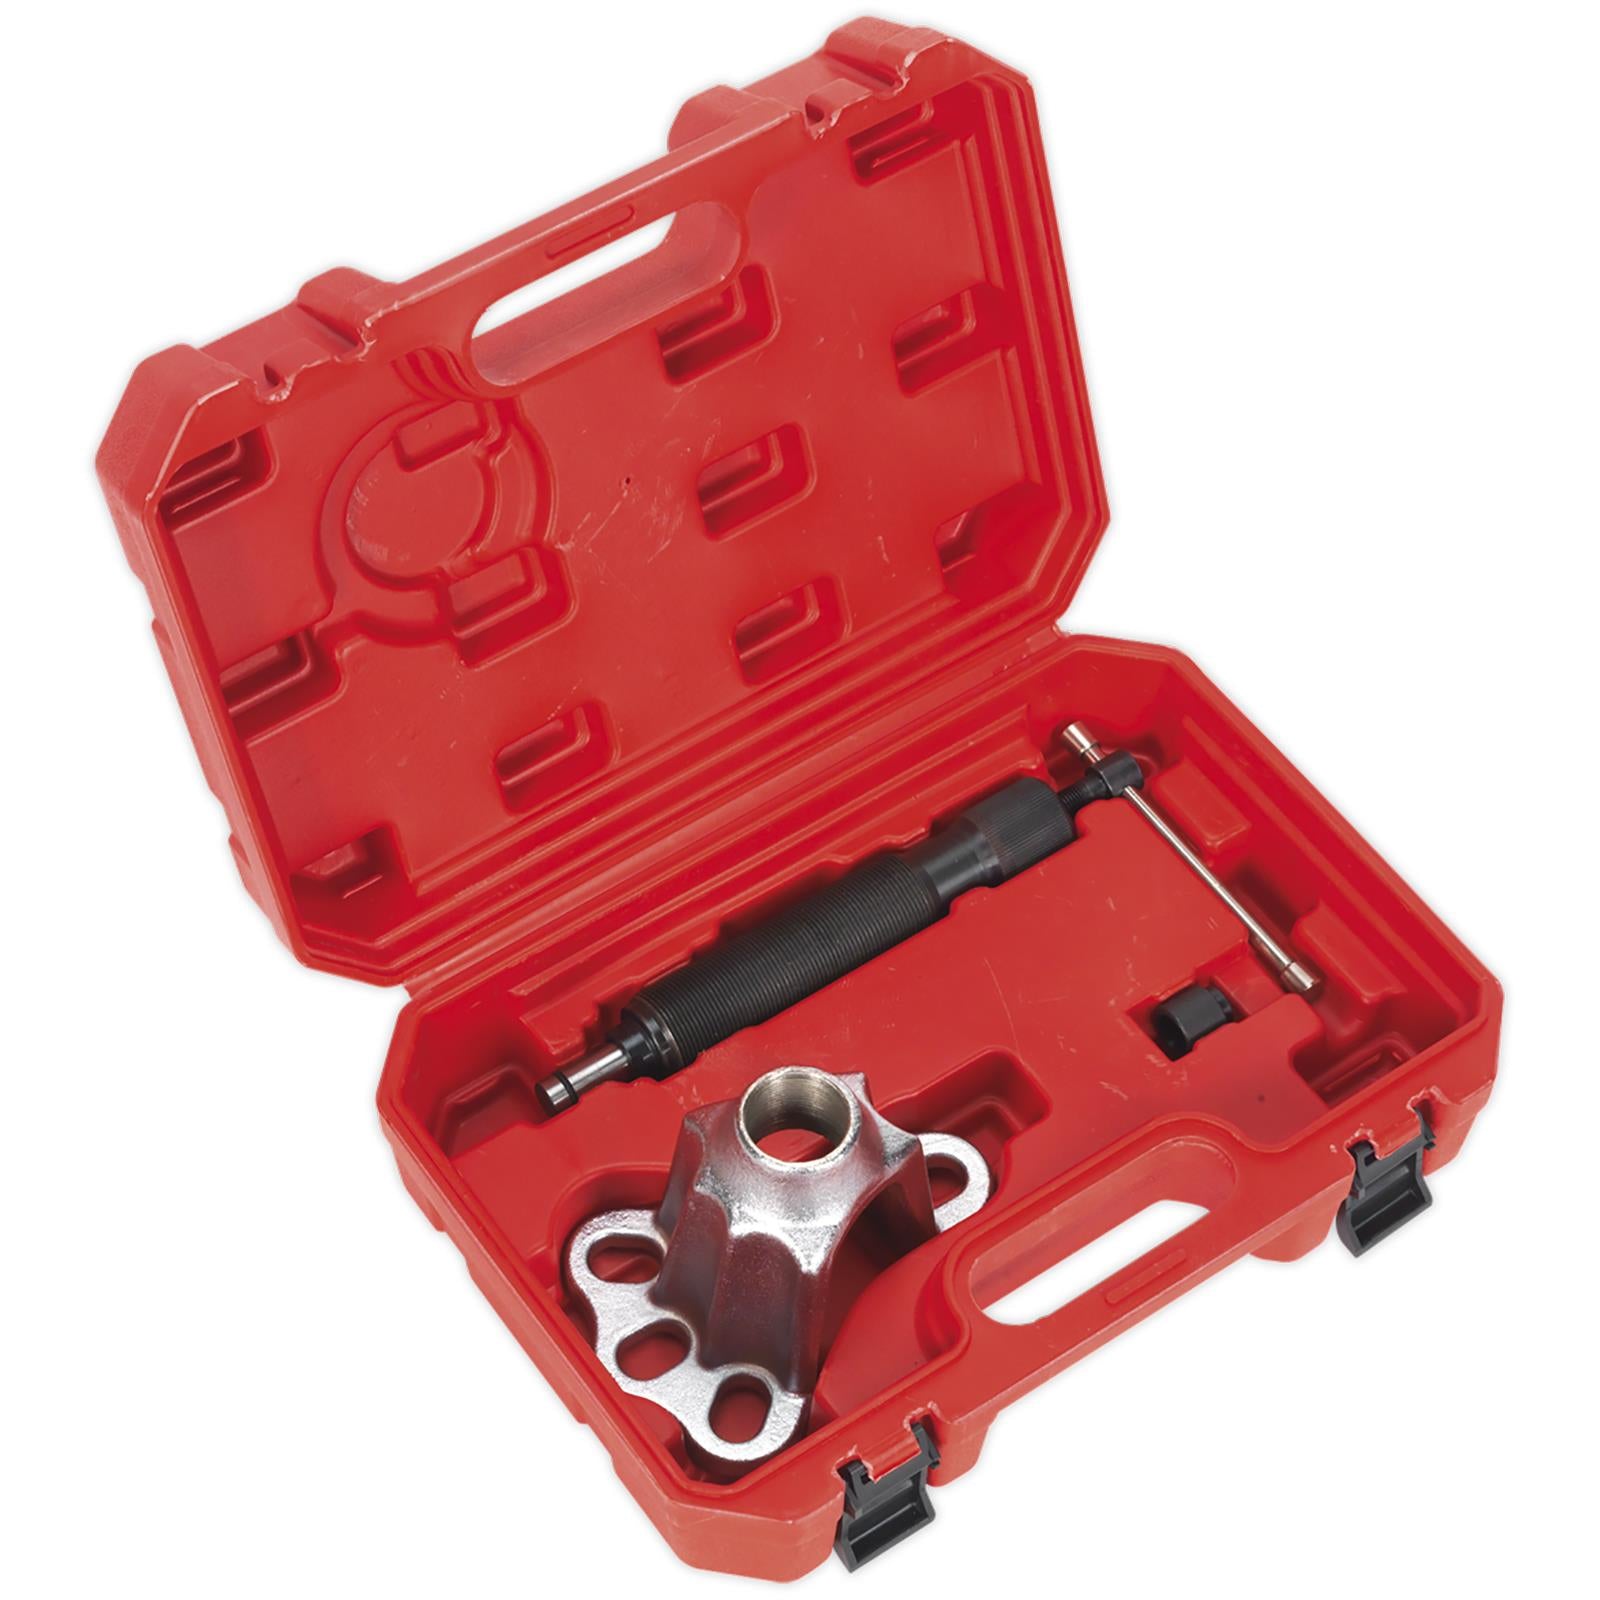 Sealey Hydraulic Hub Puller Set 10 Tonne Ram for Four and Five Stud Hubs